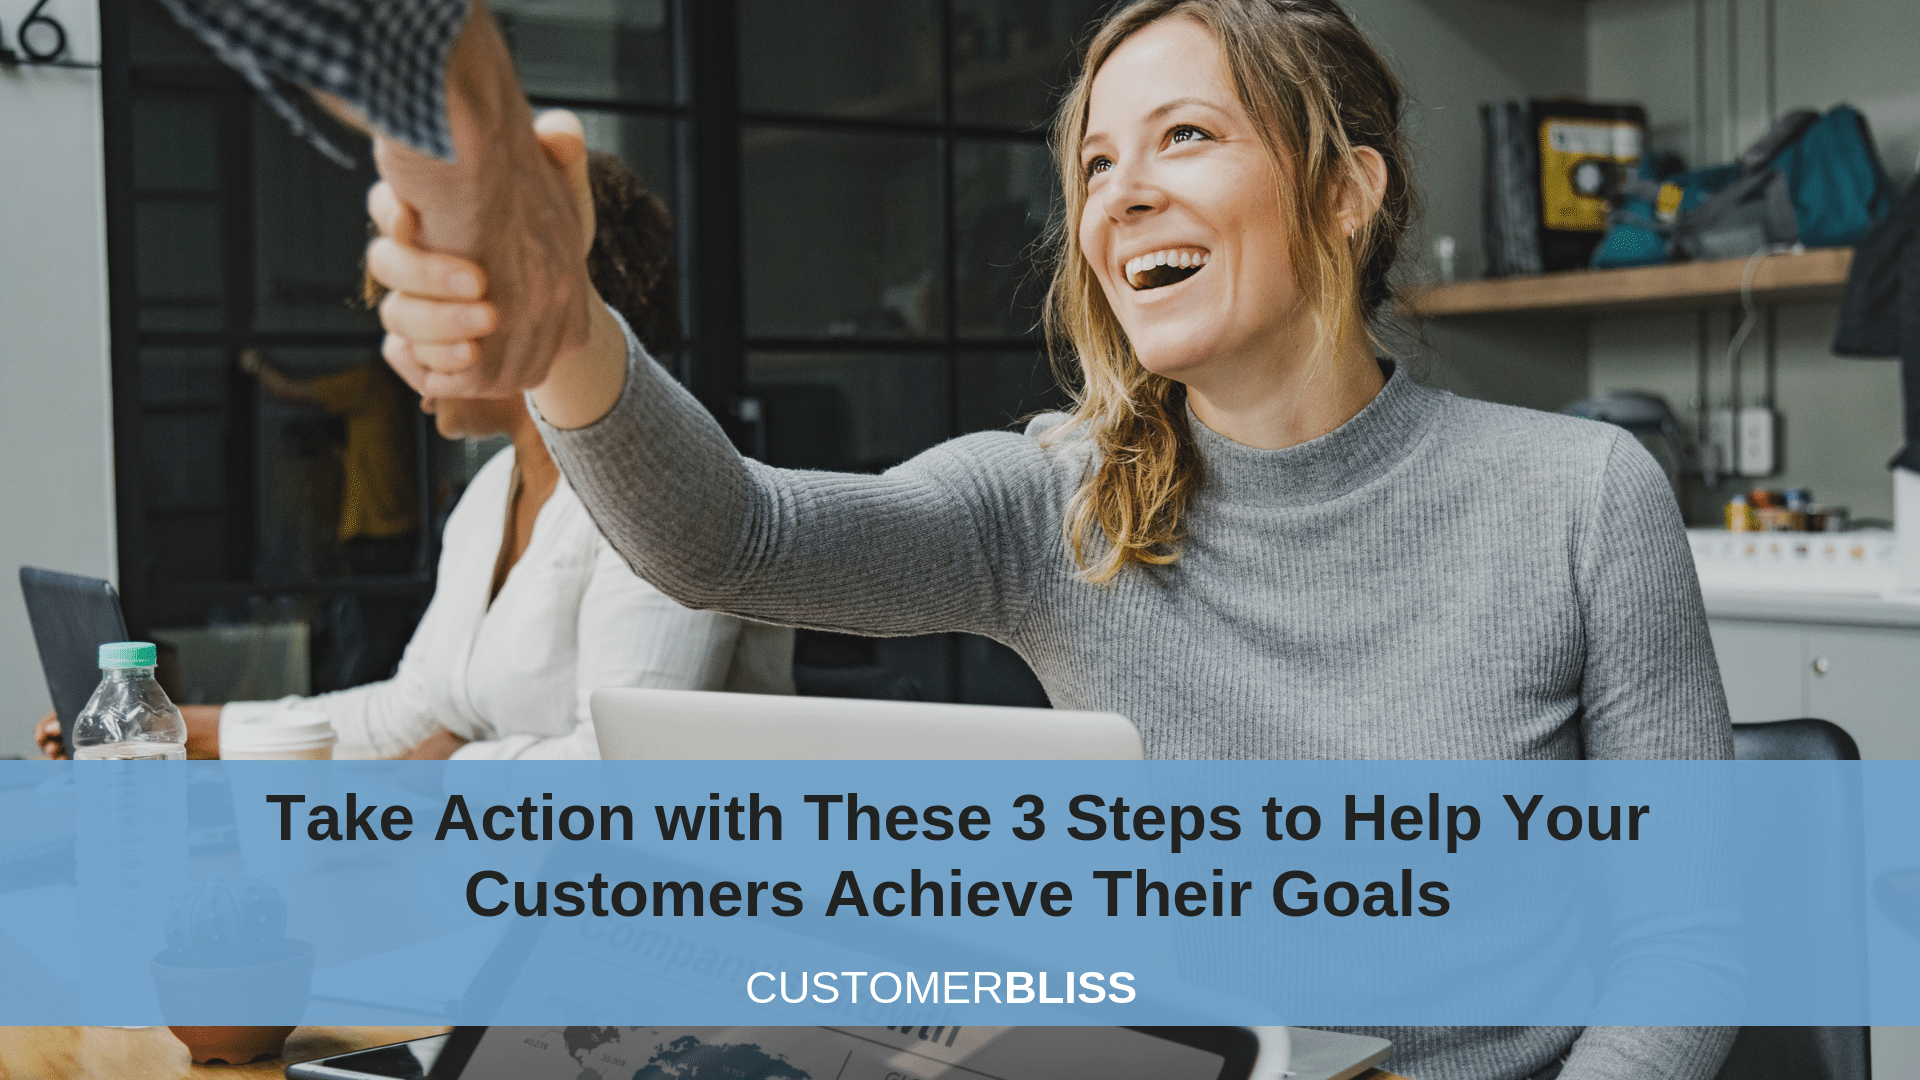 Take Action with These 3 Steps to Help Your Customers Achieve Their Goals